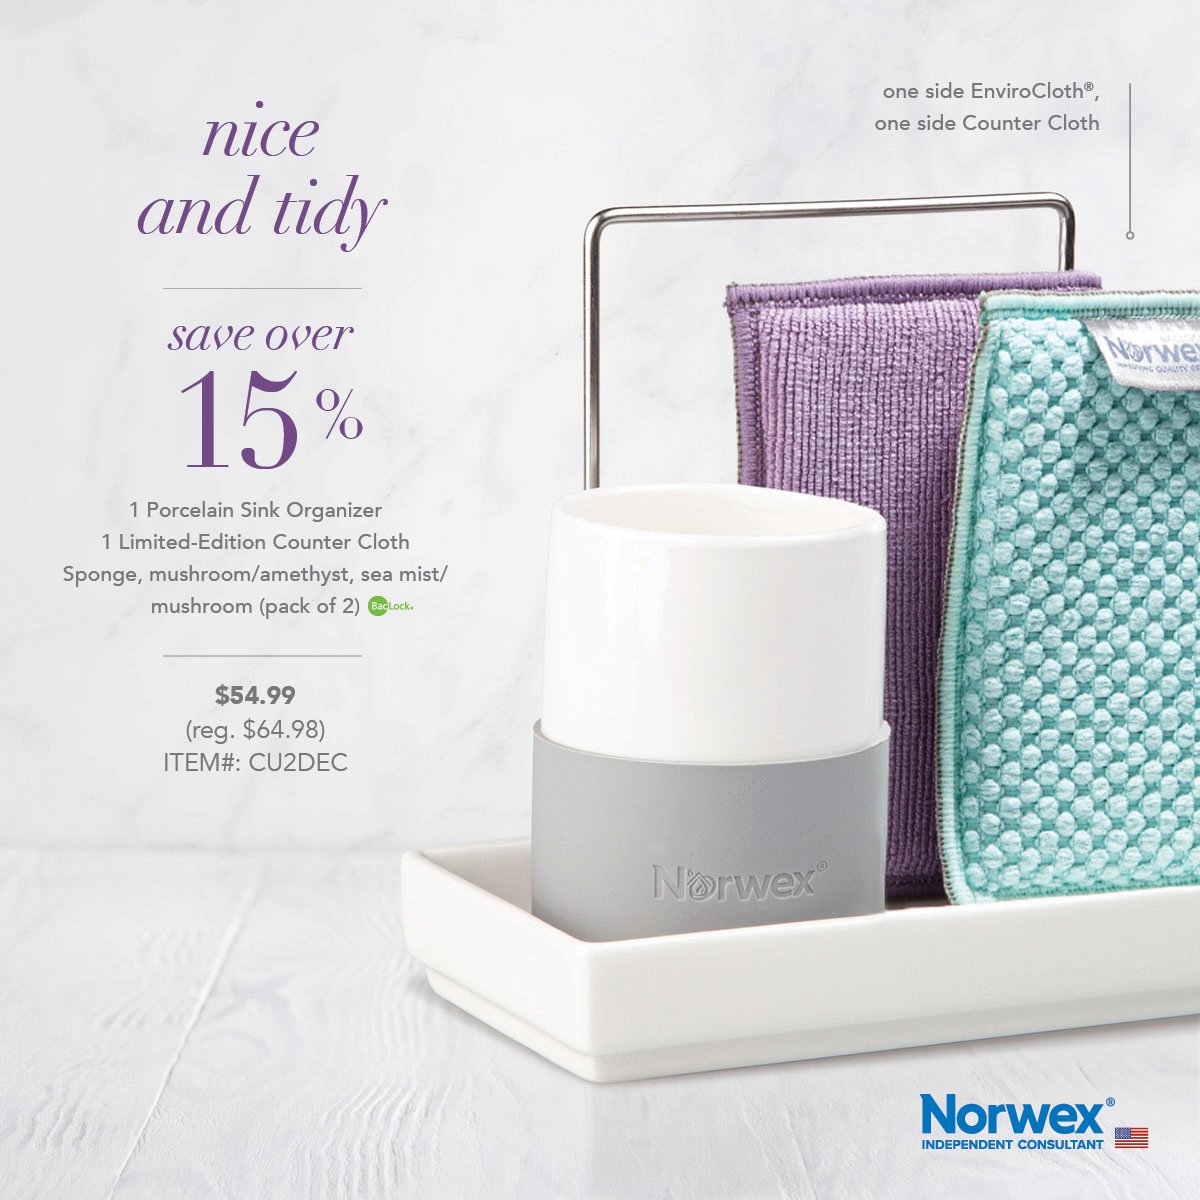 Norwex Healthy Home Cleaning Products - IC Home Show